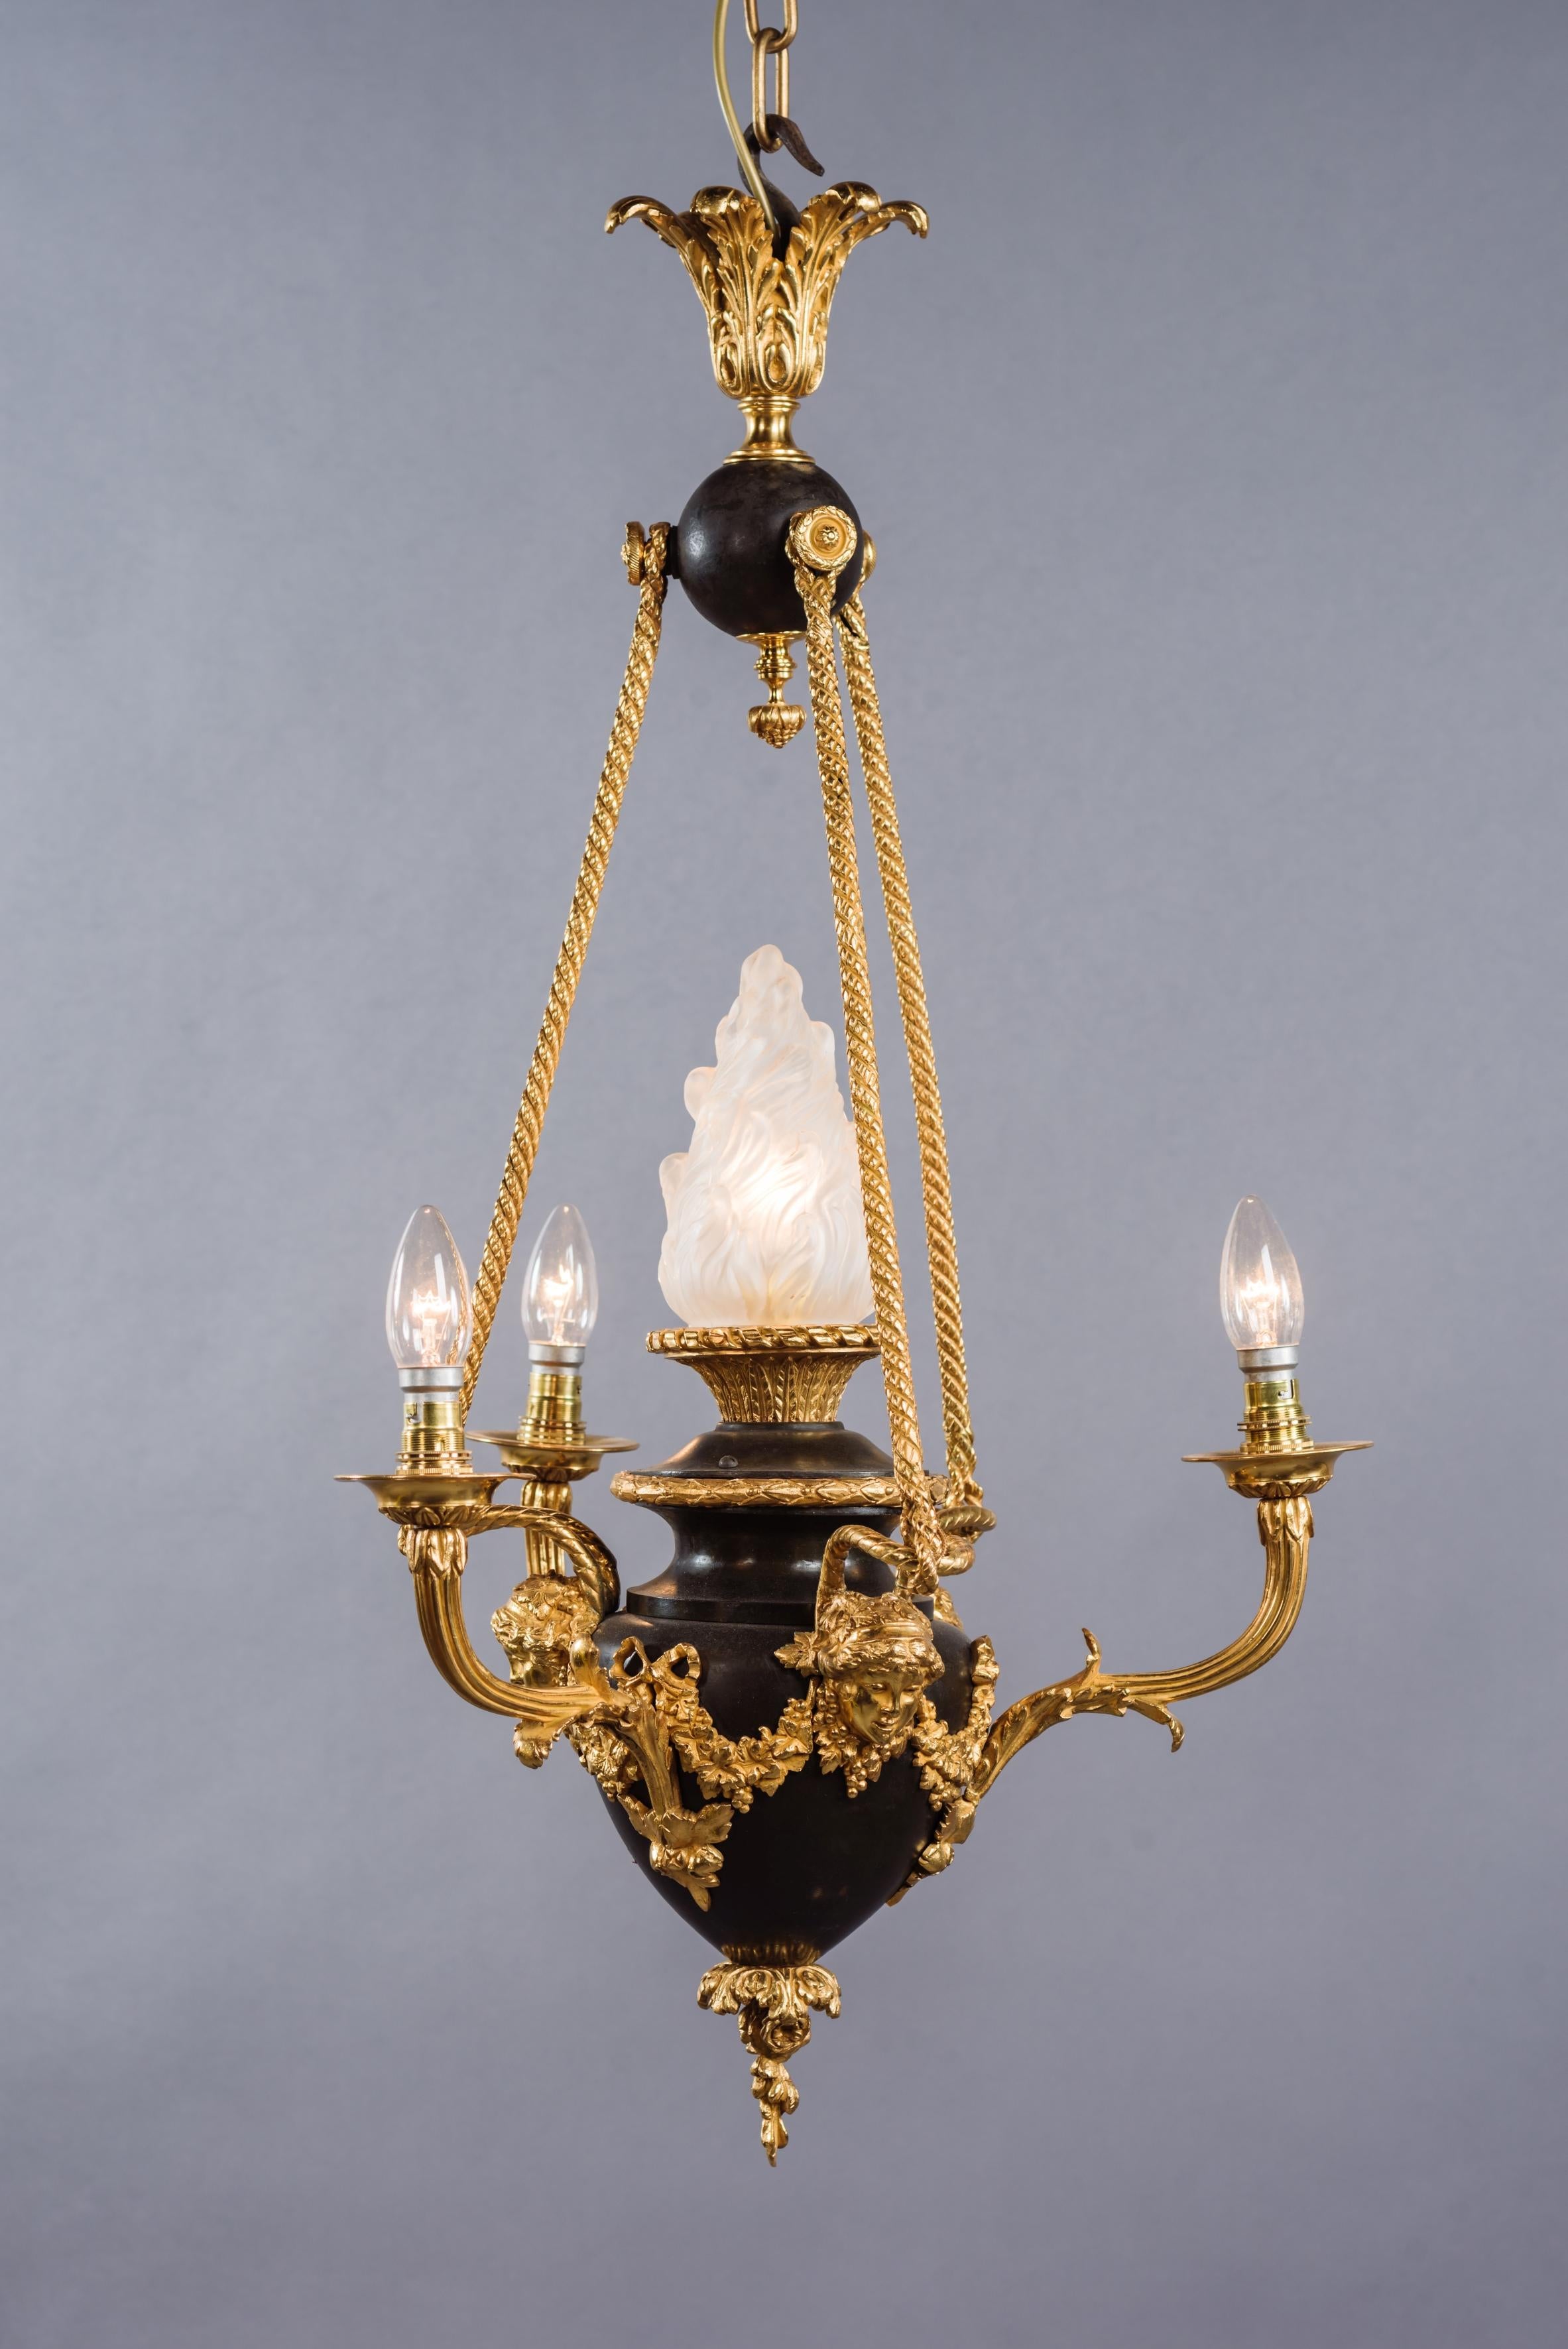 A Louis XVI style gilt and patinated bronze four-light chandelier.

French, circa 1900. 

The chandelier has a gilt-bronze acanthus cast corona above a patinated orb, with writhen suspensions rods suspending a patinated bronze urn embellished